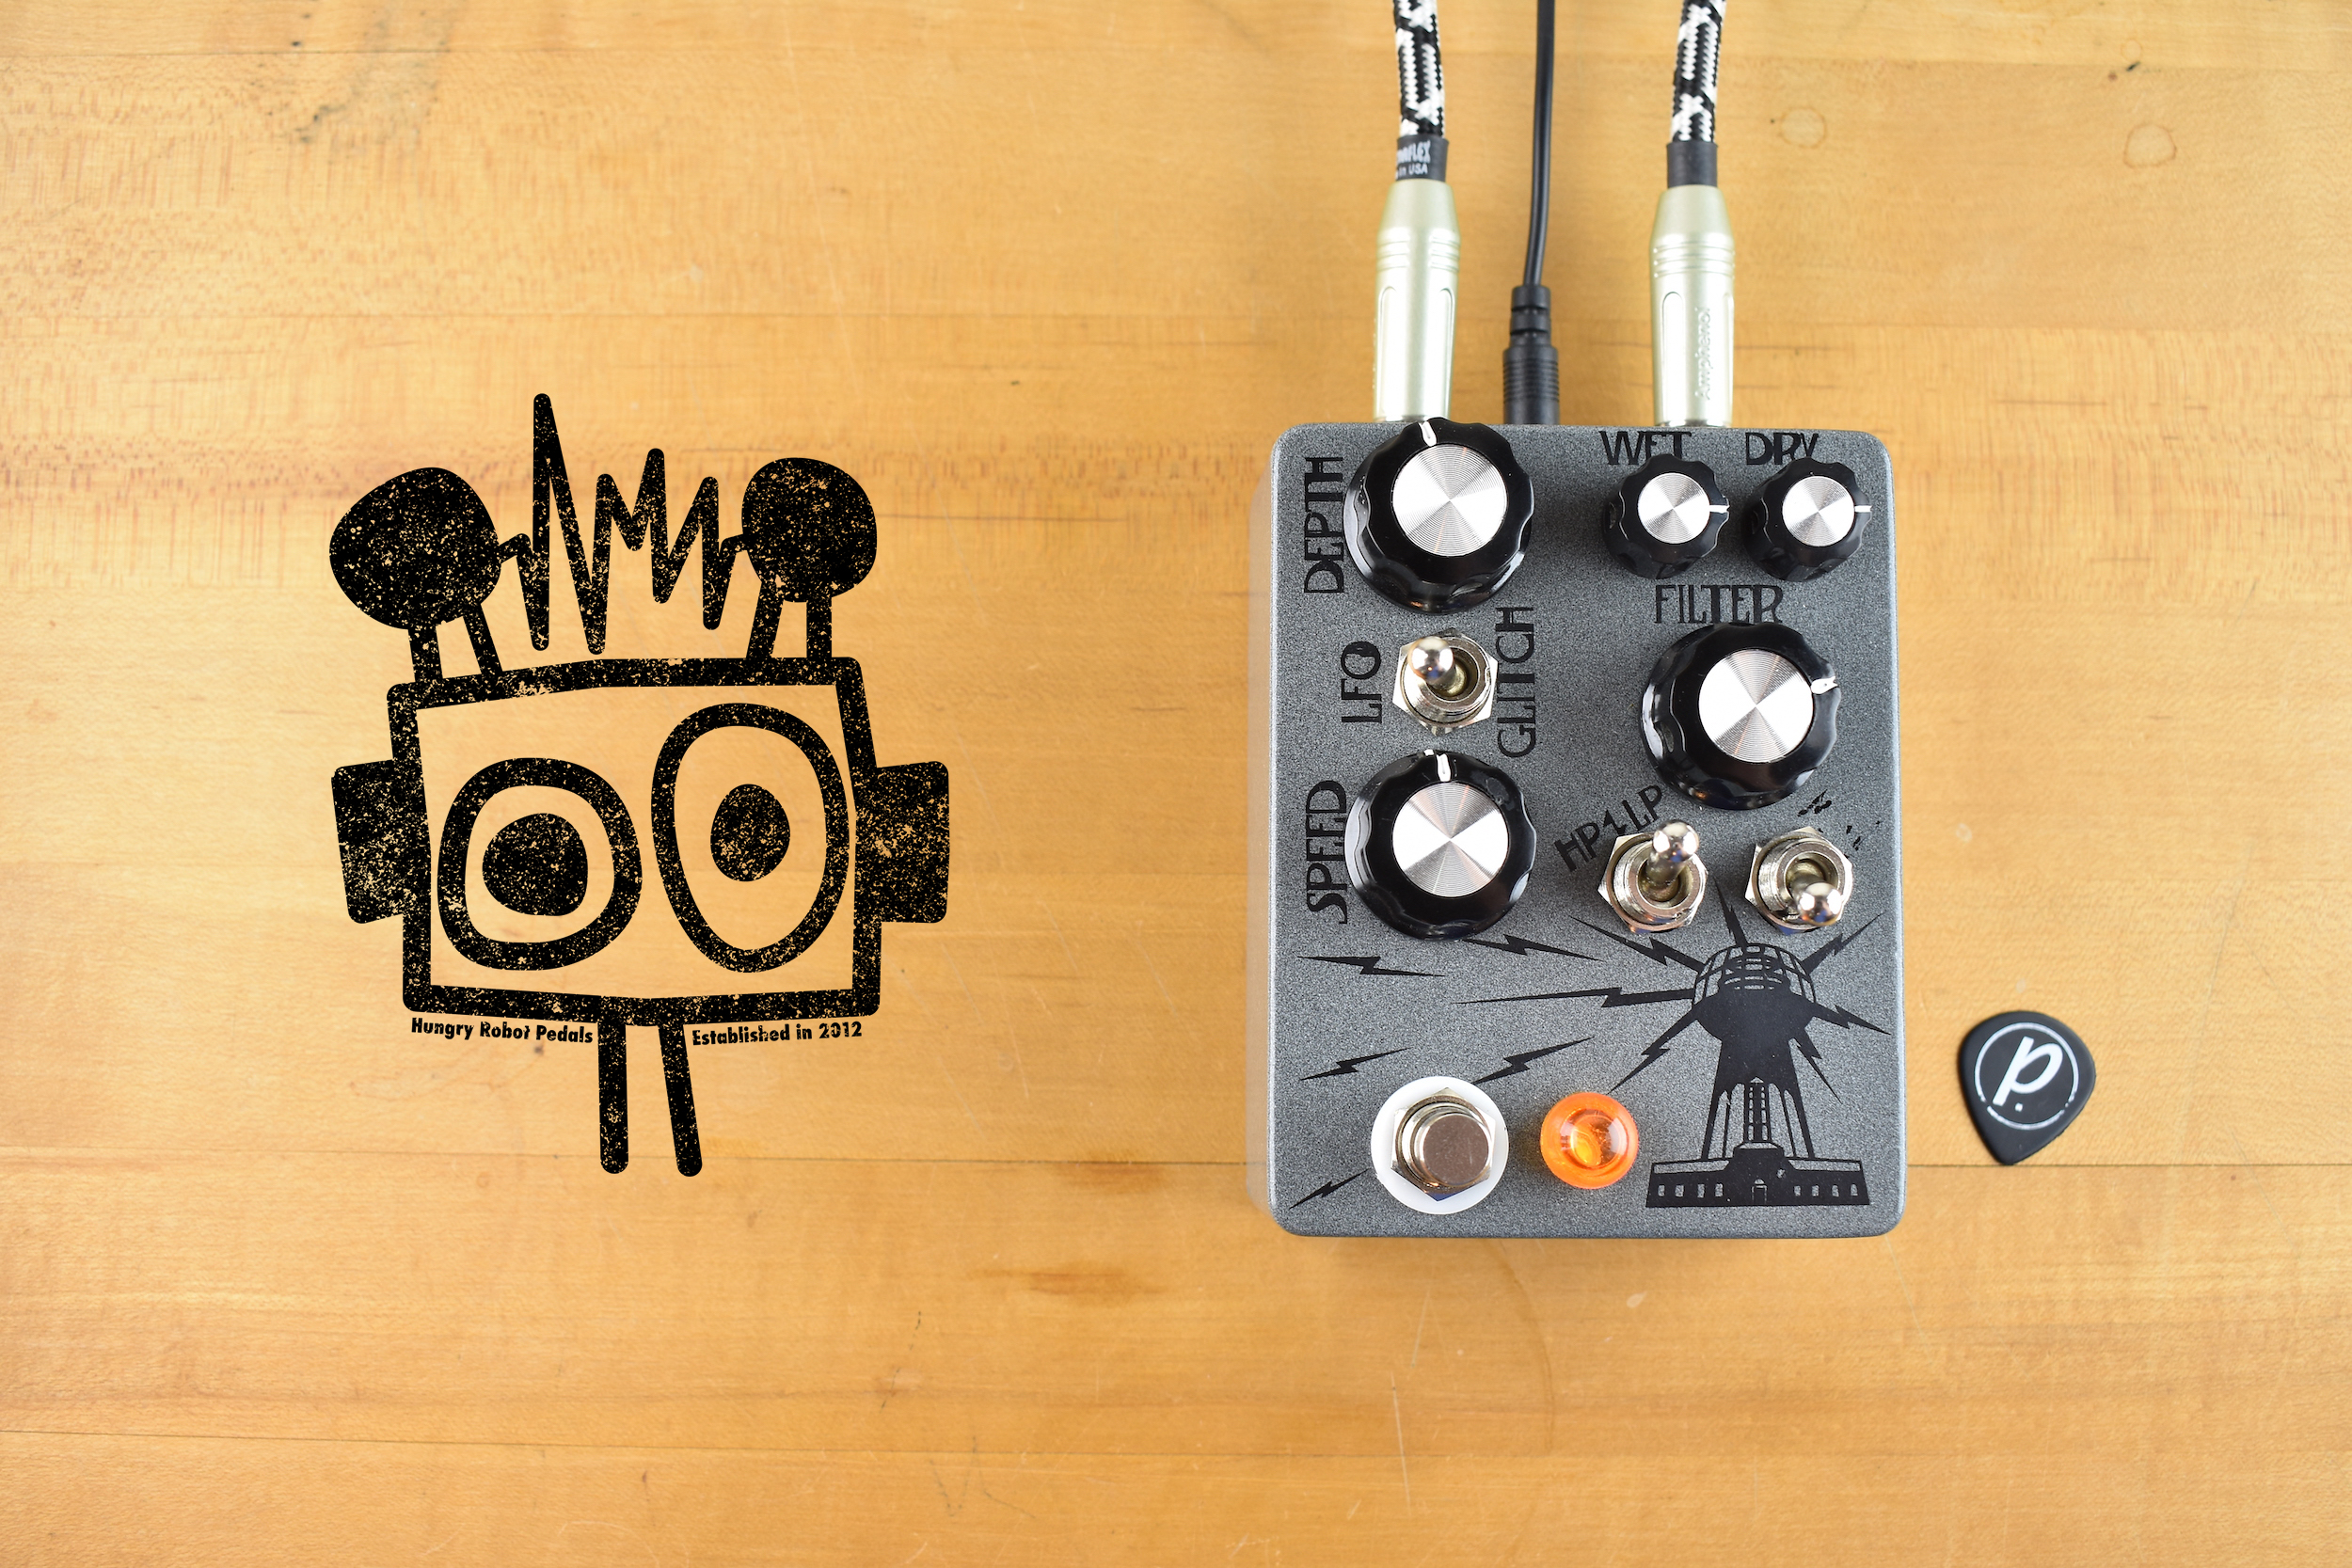 Hungry Robot Pedals Wardenclyffe Lofi Ambient Modulator (White Noise Mod) -  Pedal of the Day